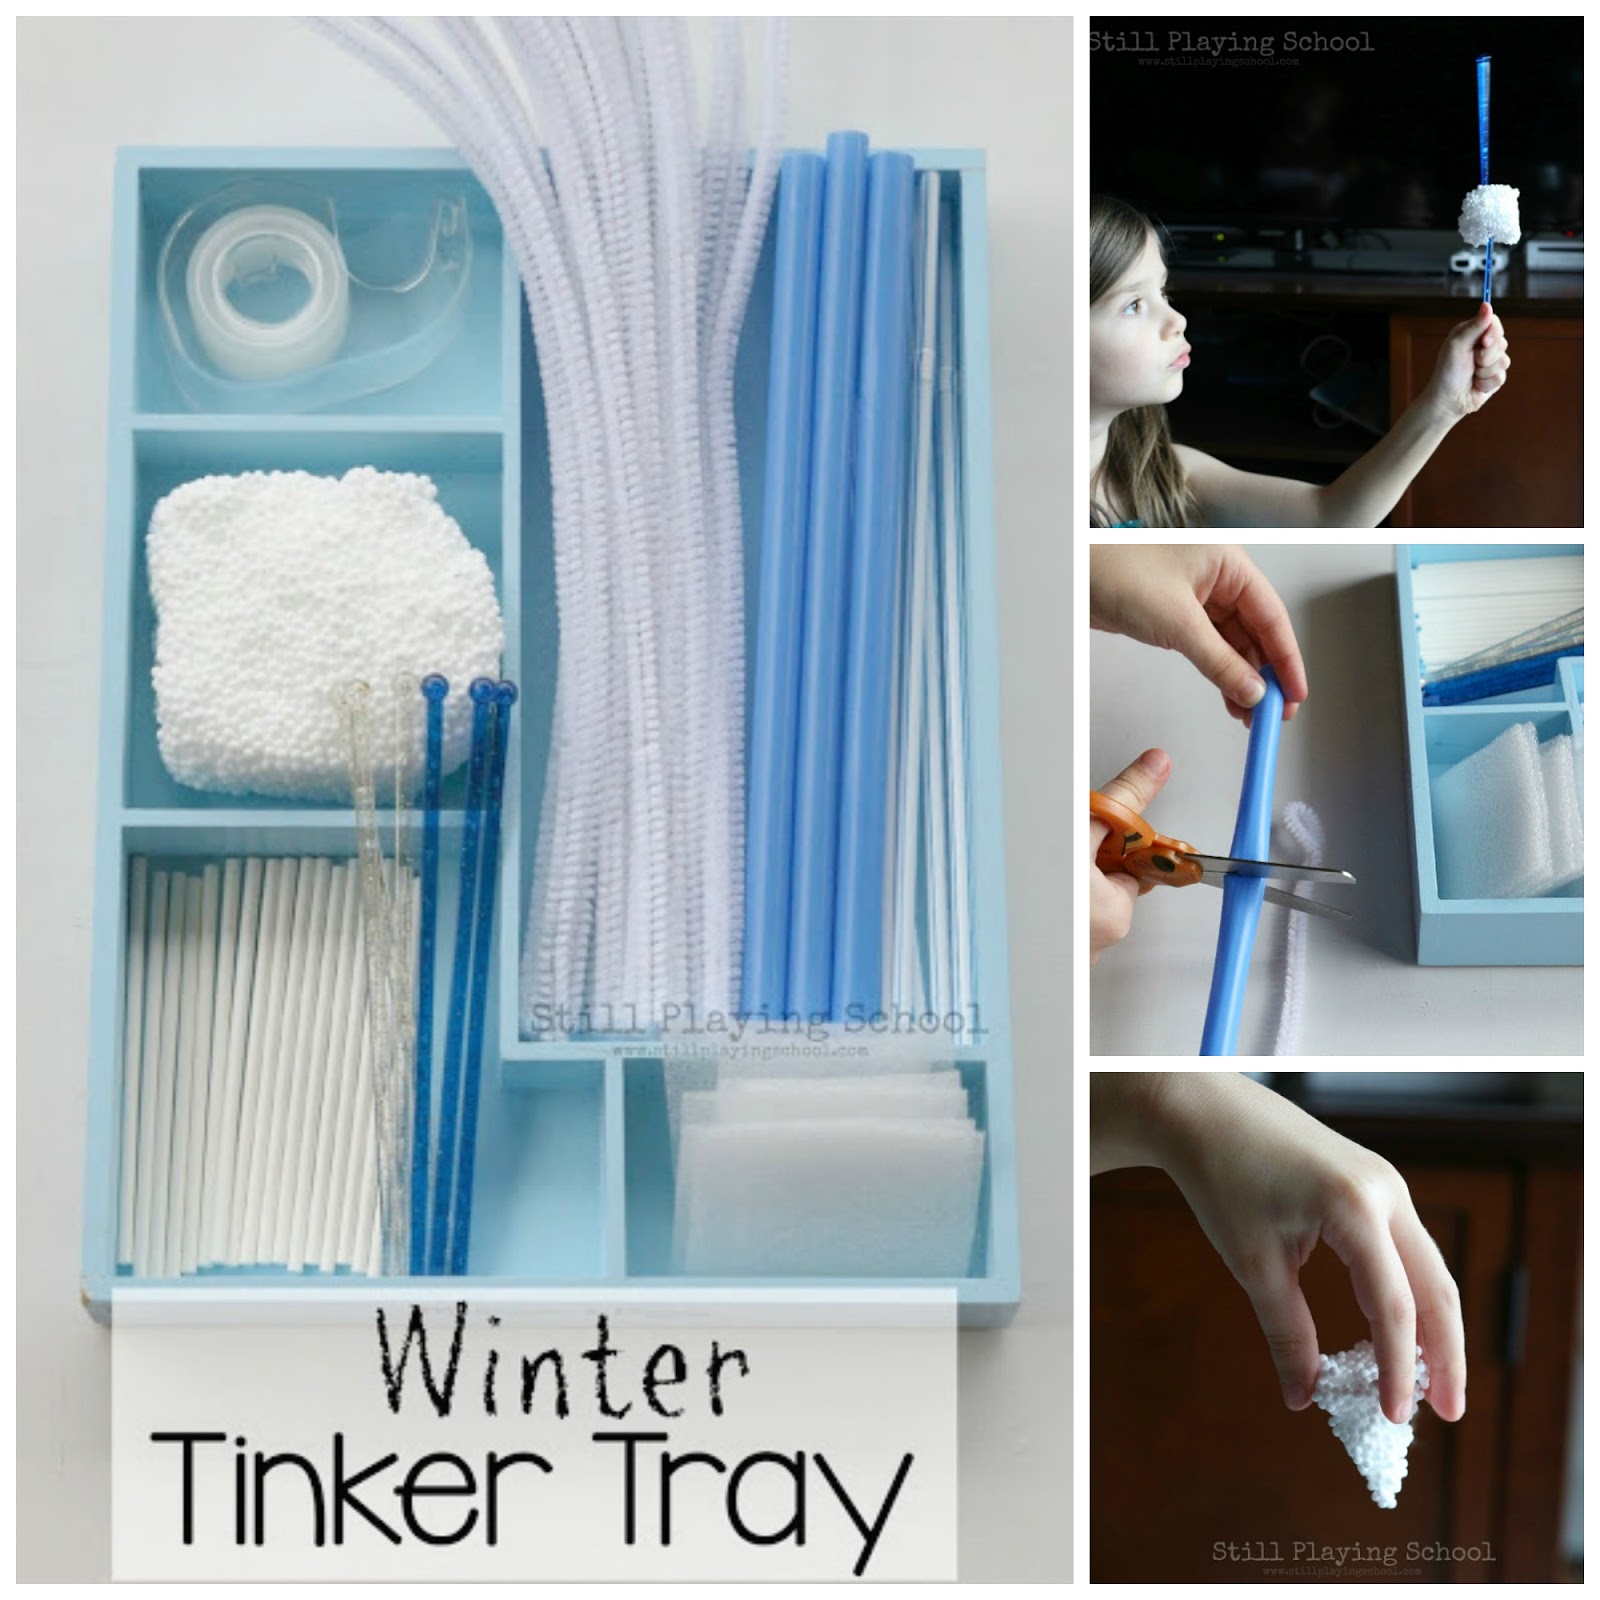 All About Tinker Trays + 10 Ways to Use Them - Meri Cherry